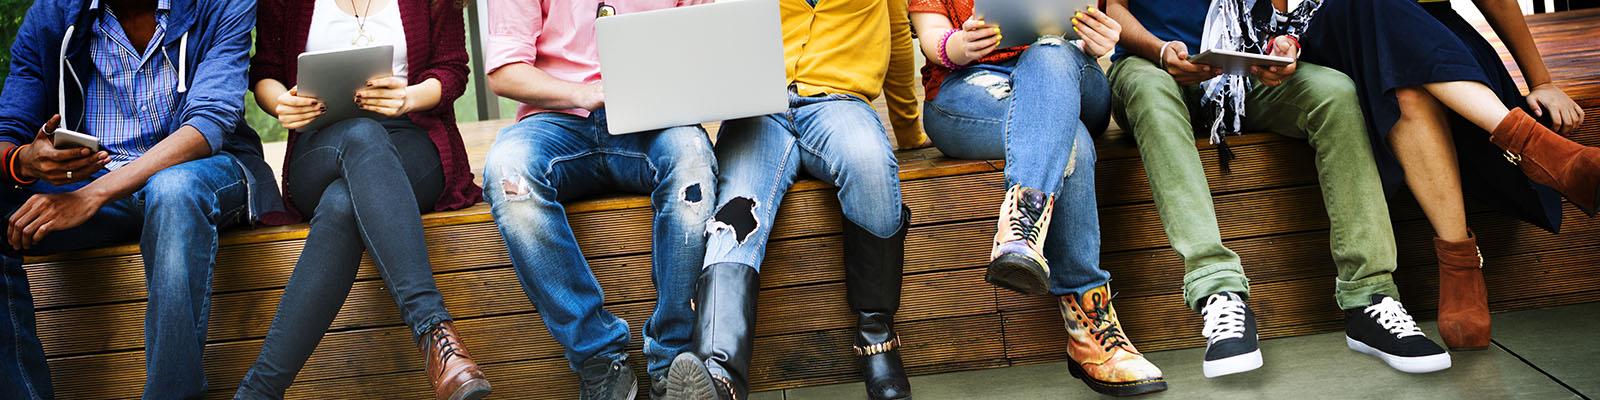 Close up of students sitting on a bench using laptops and other technology